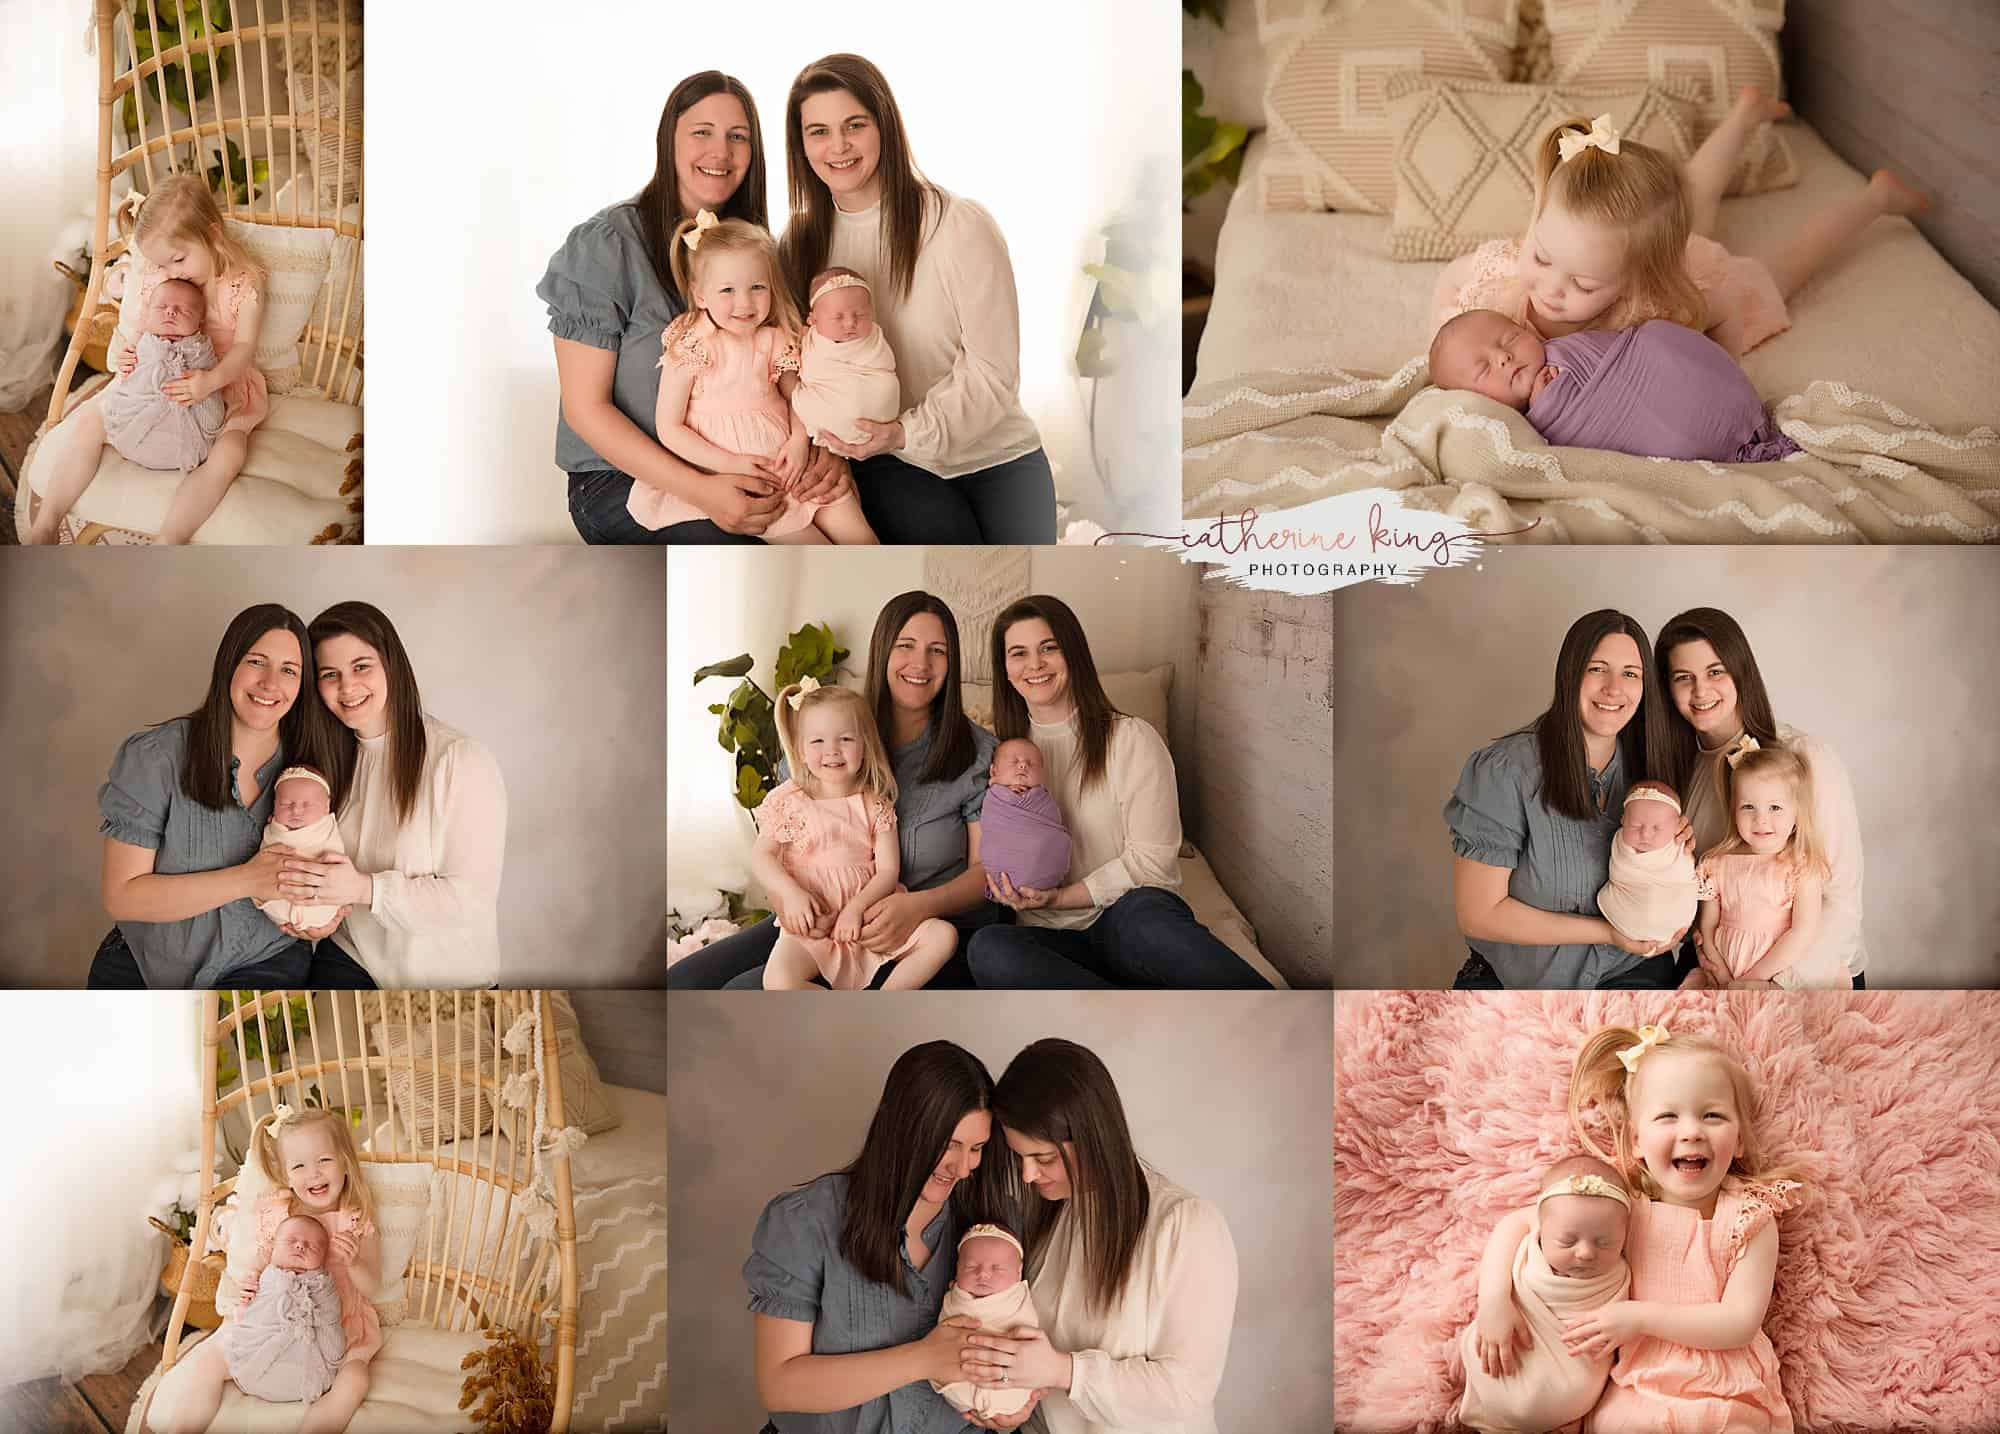 Sweet baby smiles with miss Sloane during her newborn photography session in Madison CT